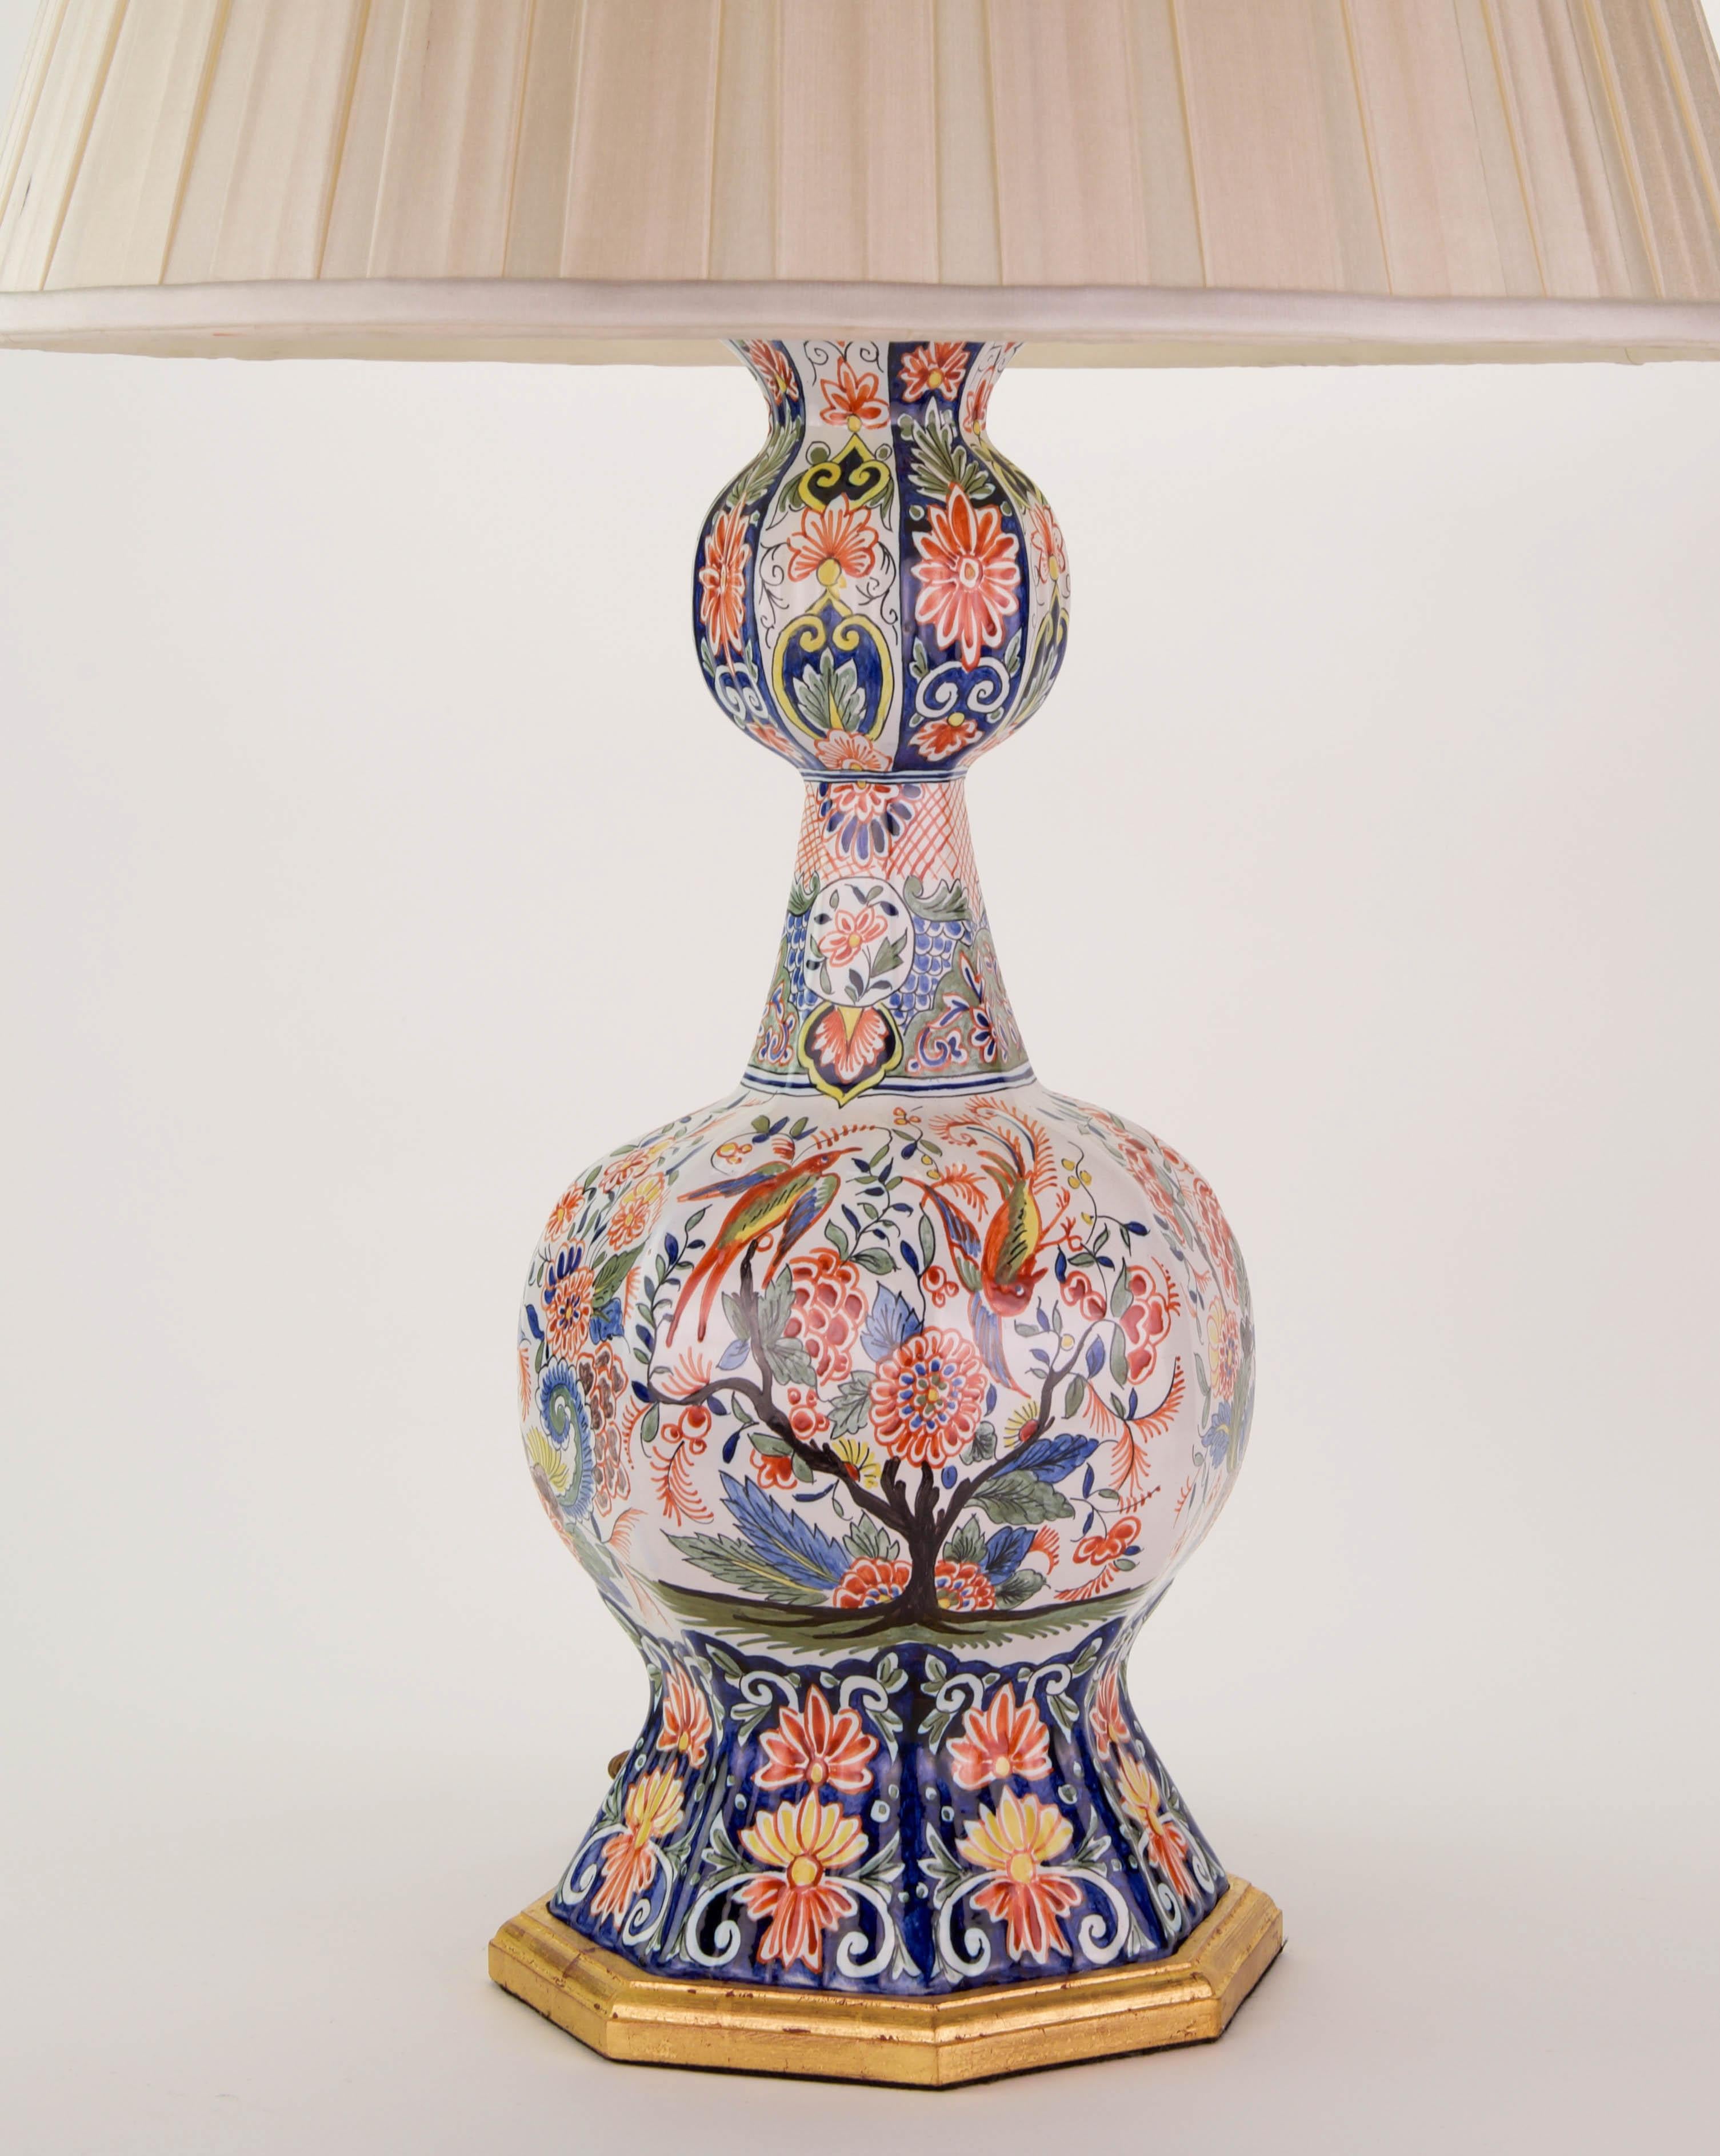 Large Polychrome Delft Antique Table Lamp In Good Condition For Sale In London, GB